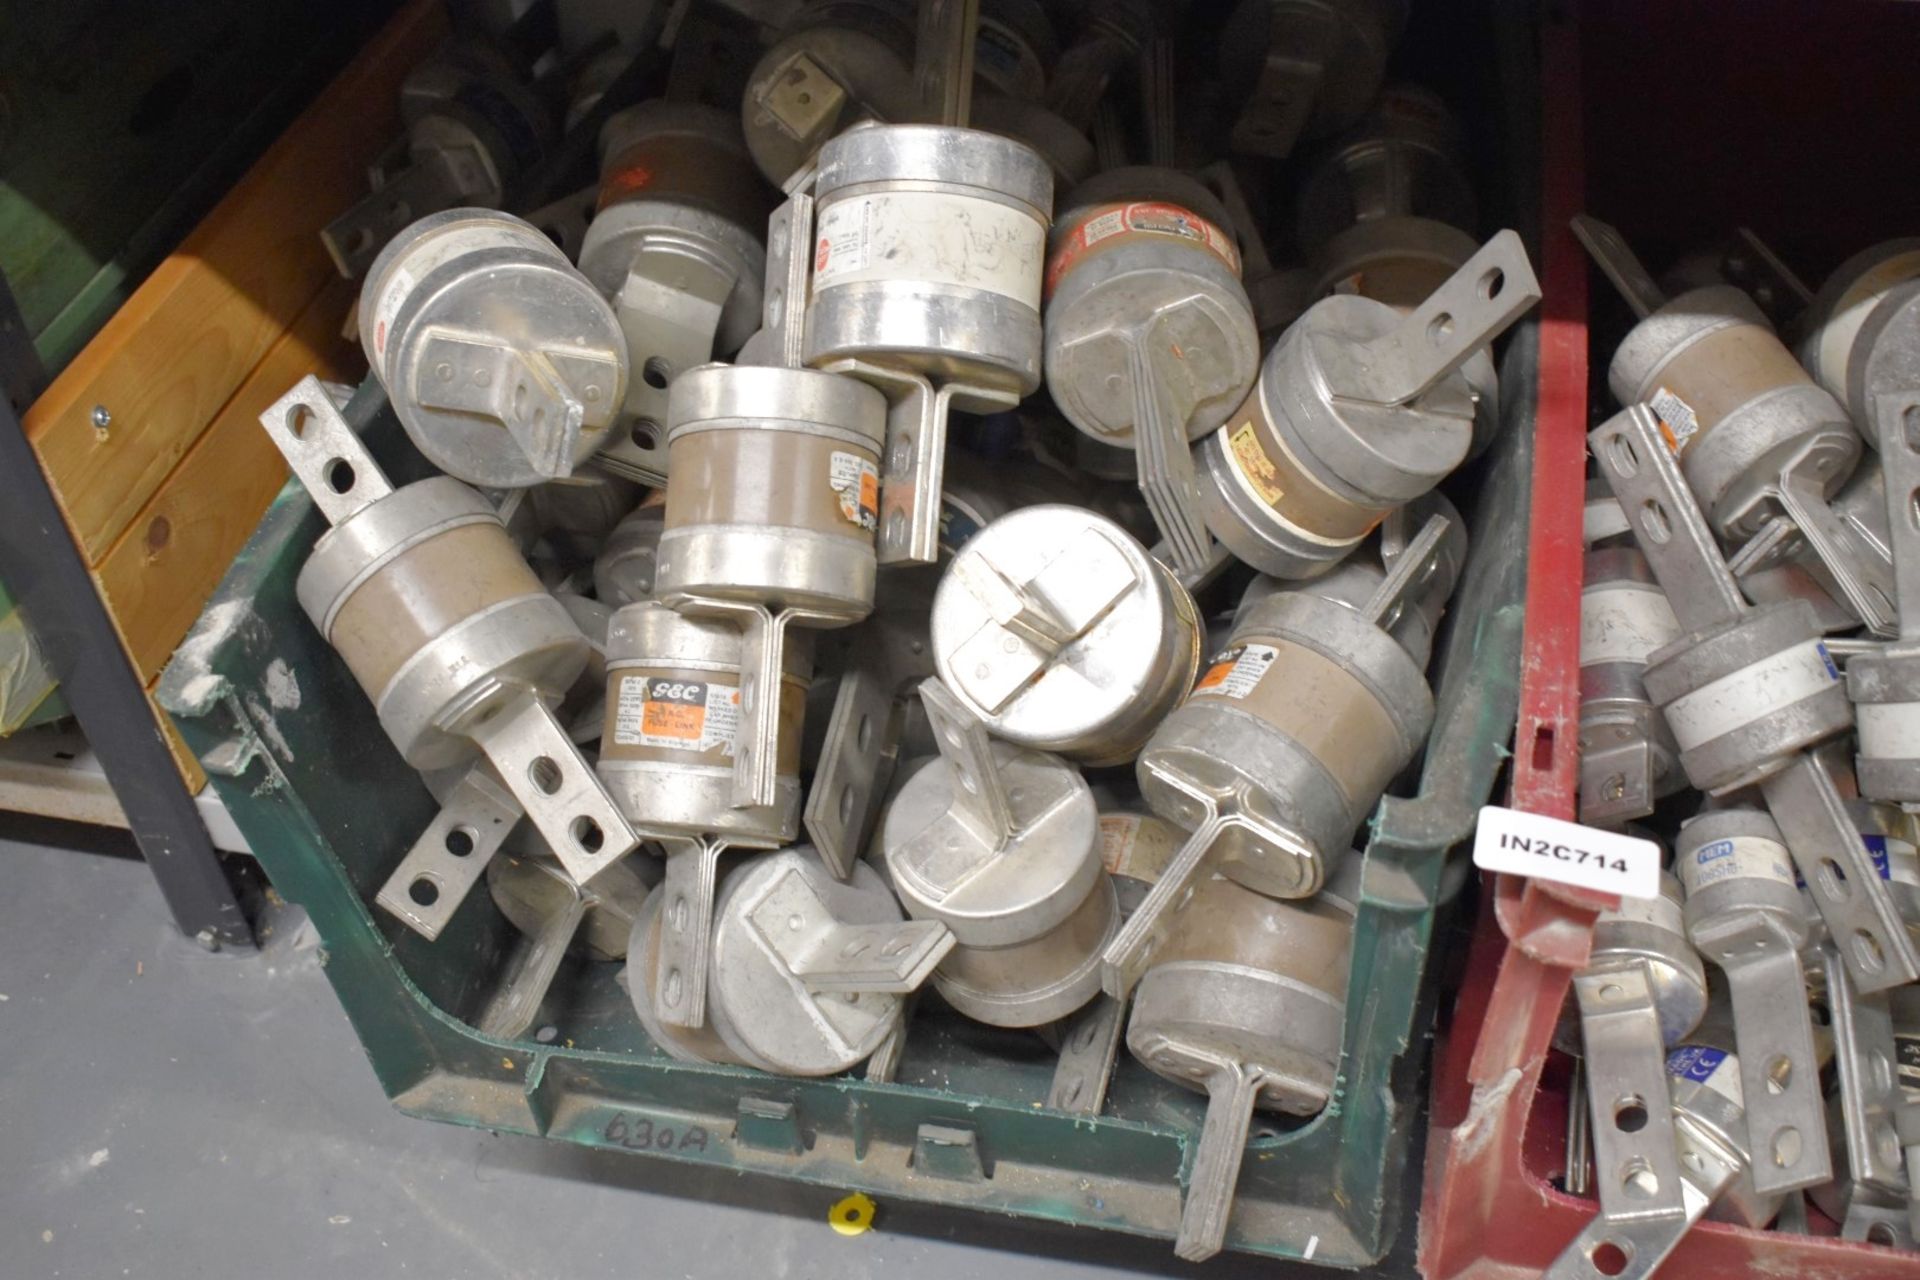 2 x Storage Containers With Contents - Includes Large Quantity of Industrial Fuses - Image 4 of 13